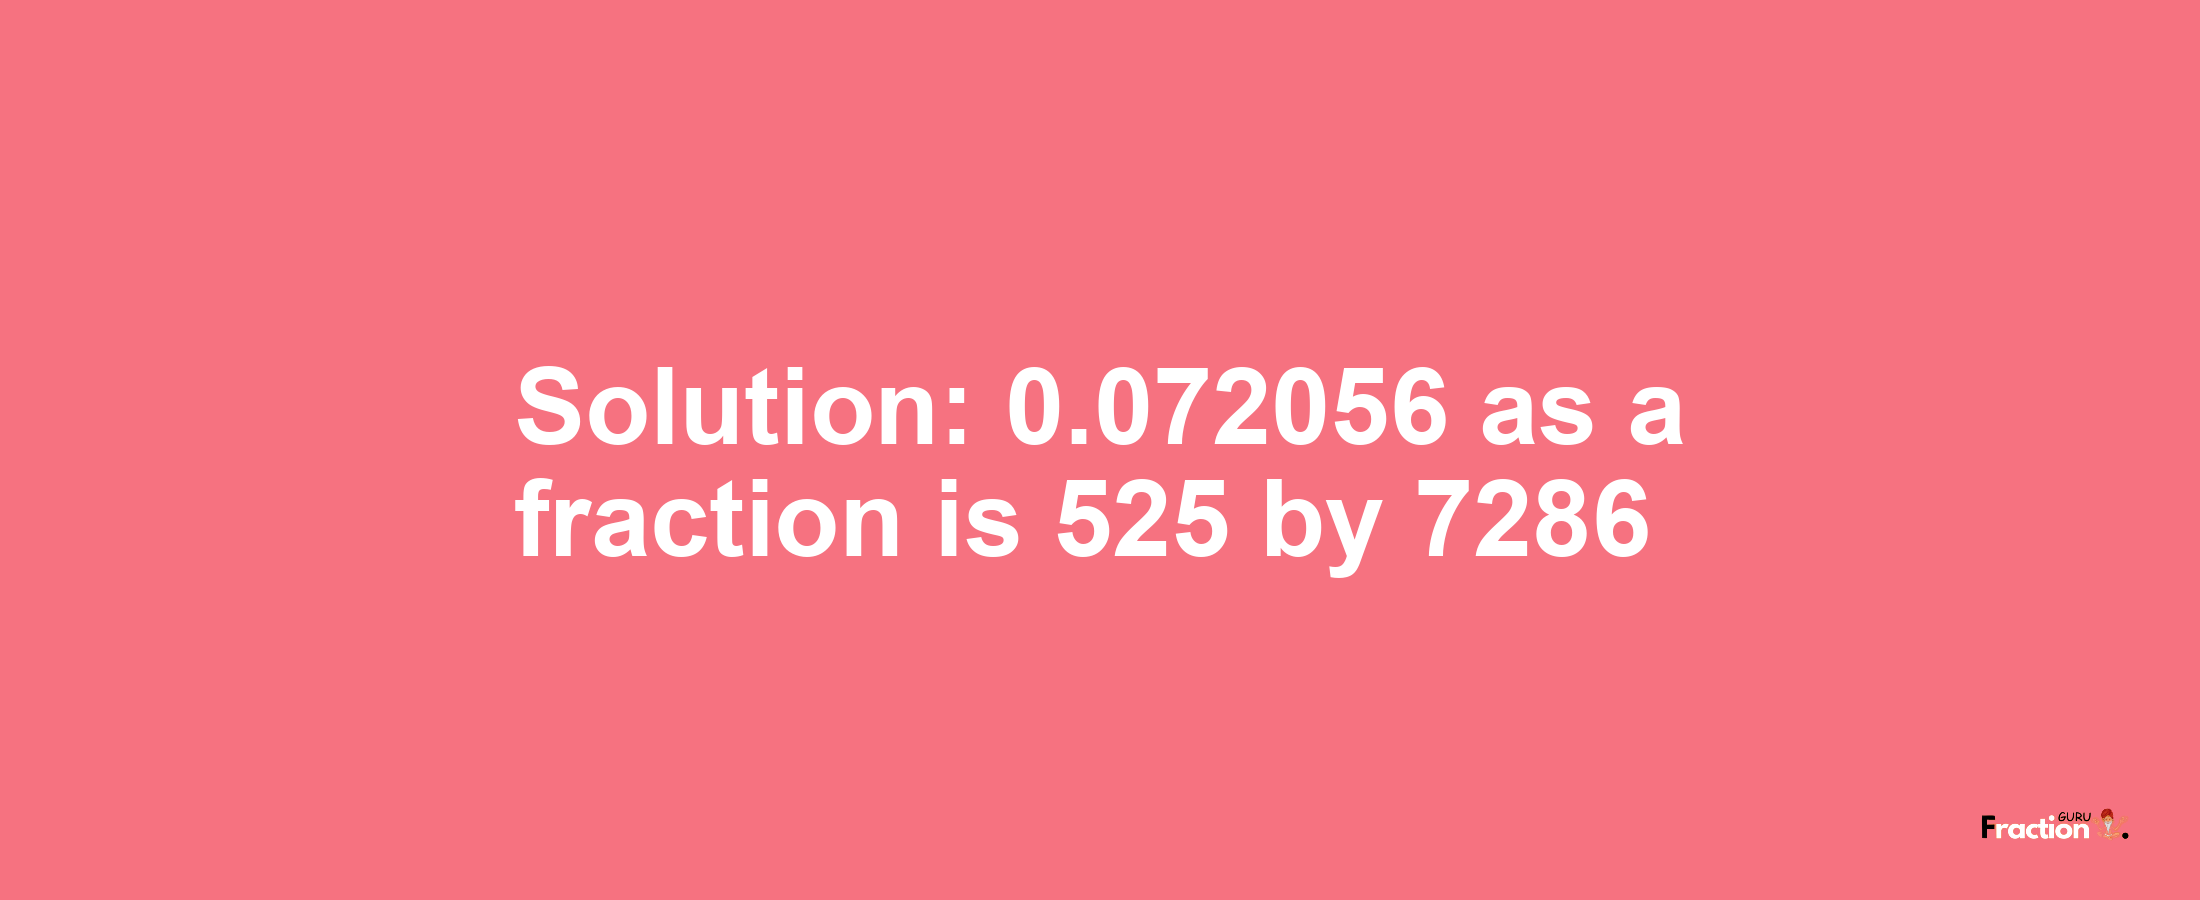 Solution:0.072056 as a fraction is 525/7286